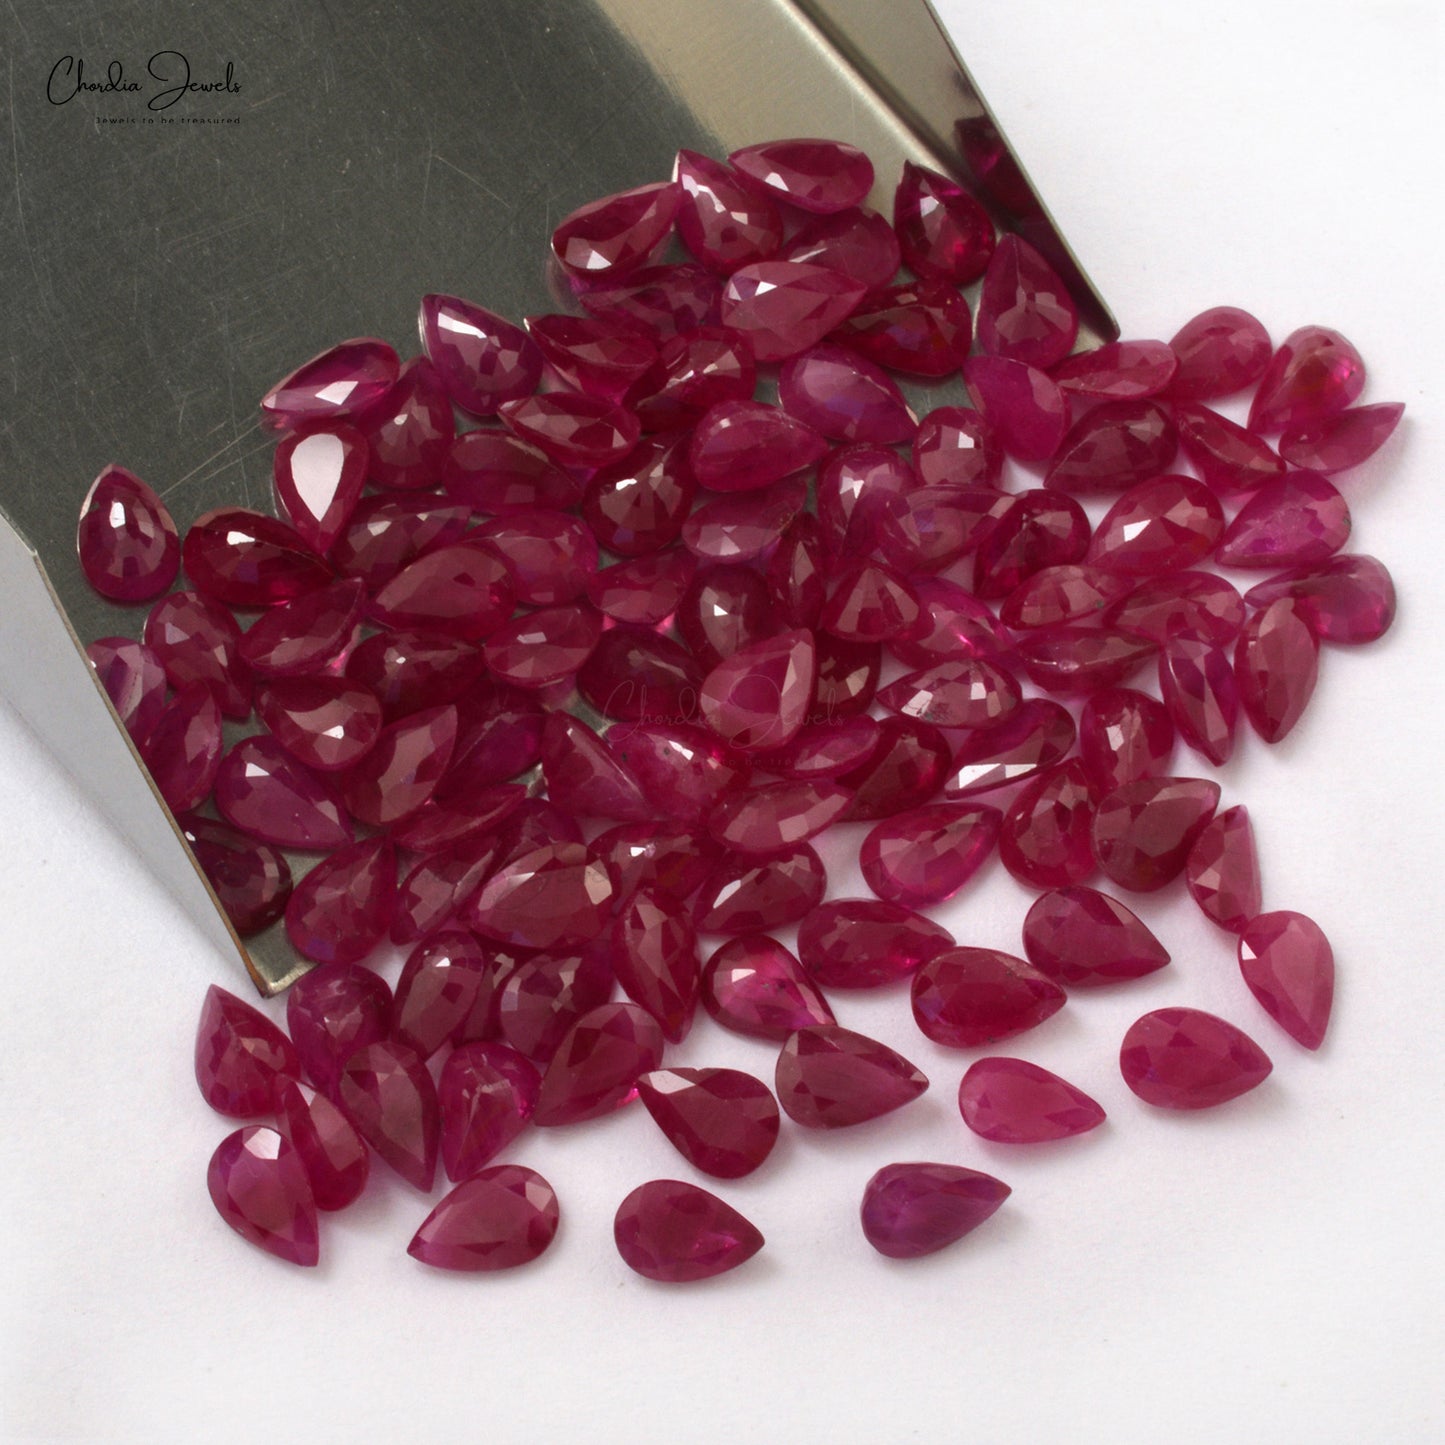 Load image into Gallery viewer, High Quality Loose Genuine Ruby Faceted Pear 8x6mm, 1 Piece
